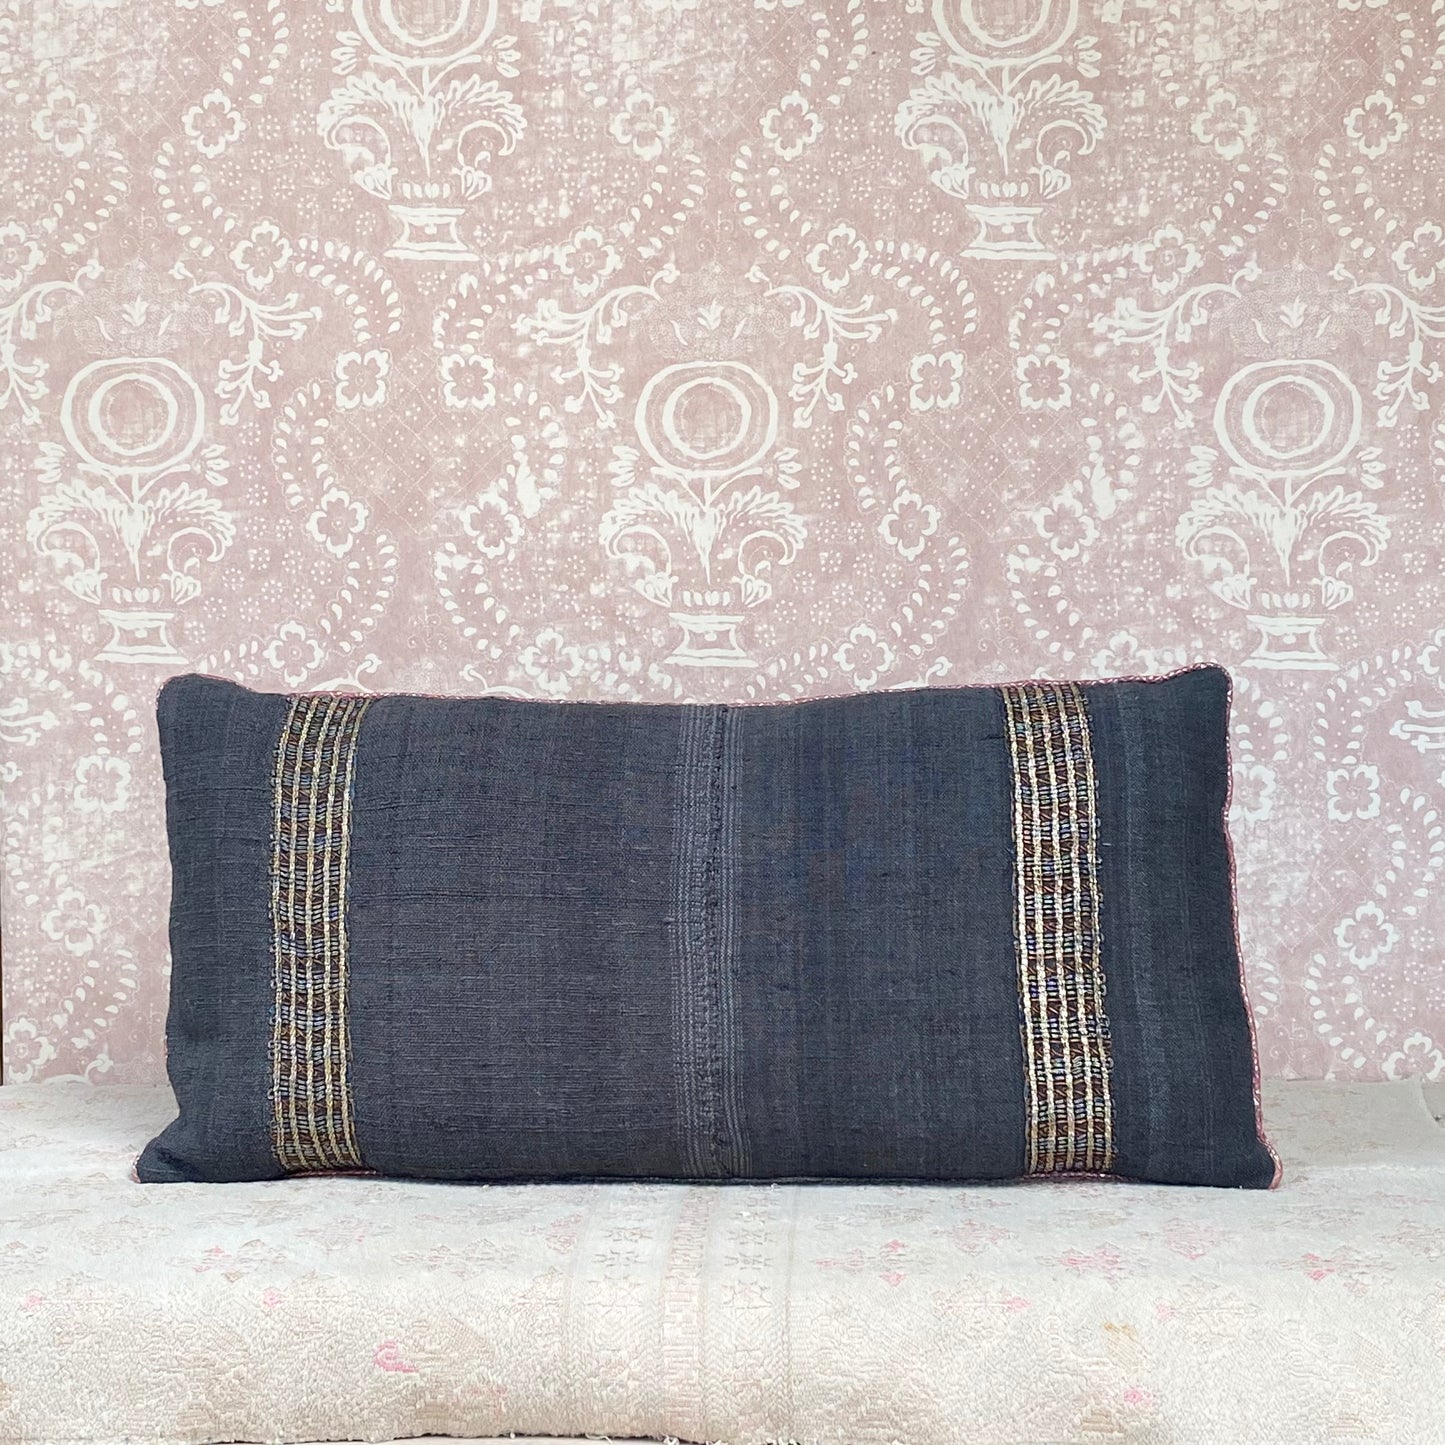 A Pair of Cushions in Antique Black Linen